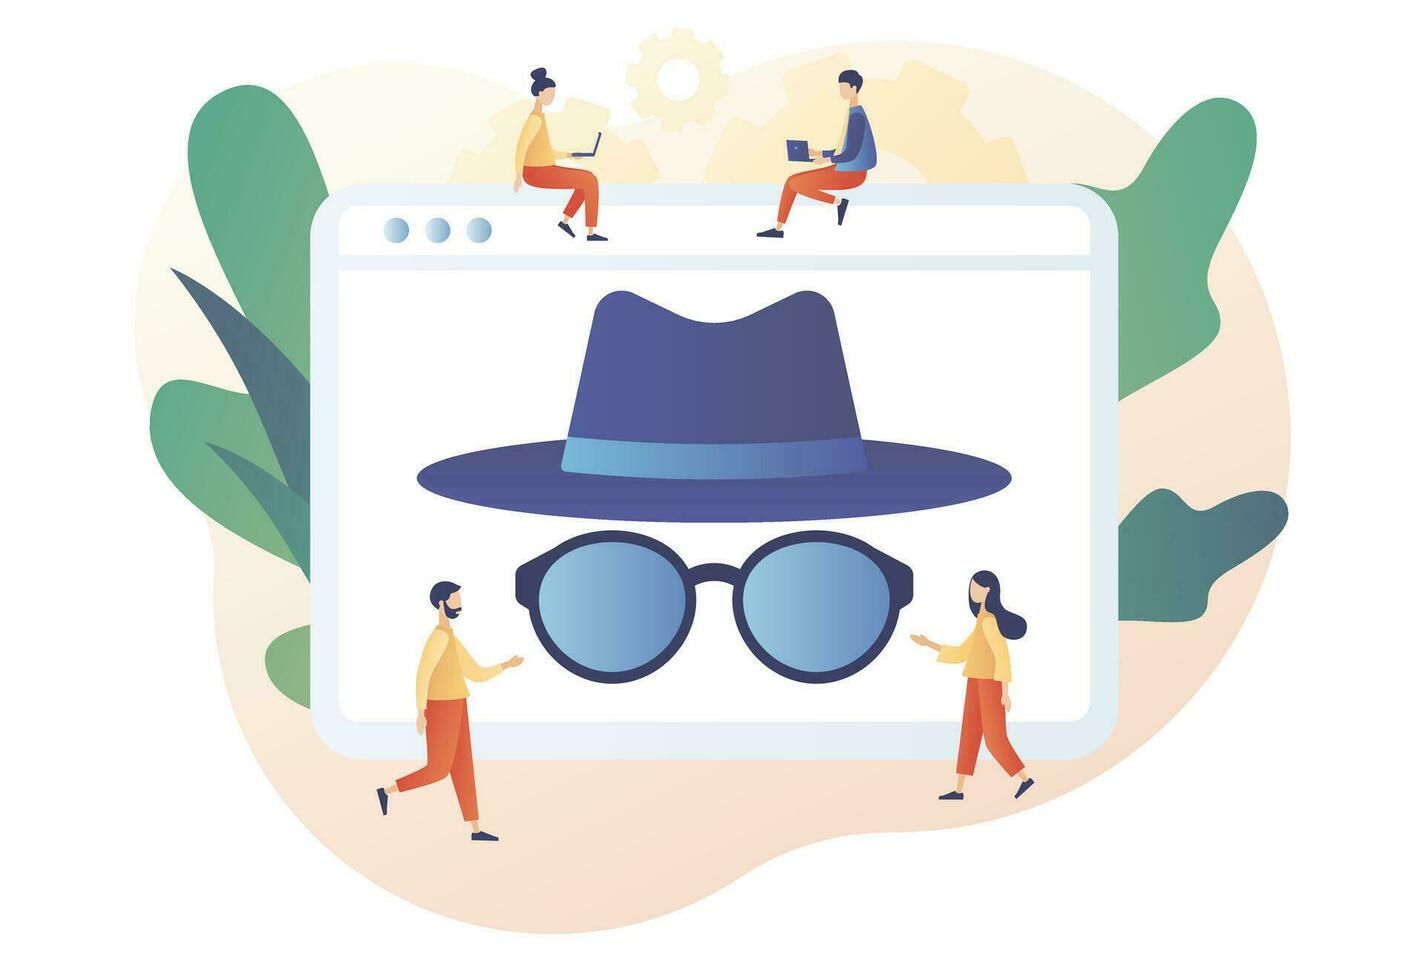 Incognito mode concept. Anonymous search. Browse in private. Online privacy and personal data protection. Confidential information. Modern flat cartoon style. Vector illustration on white background